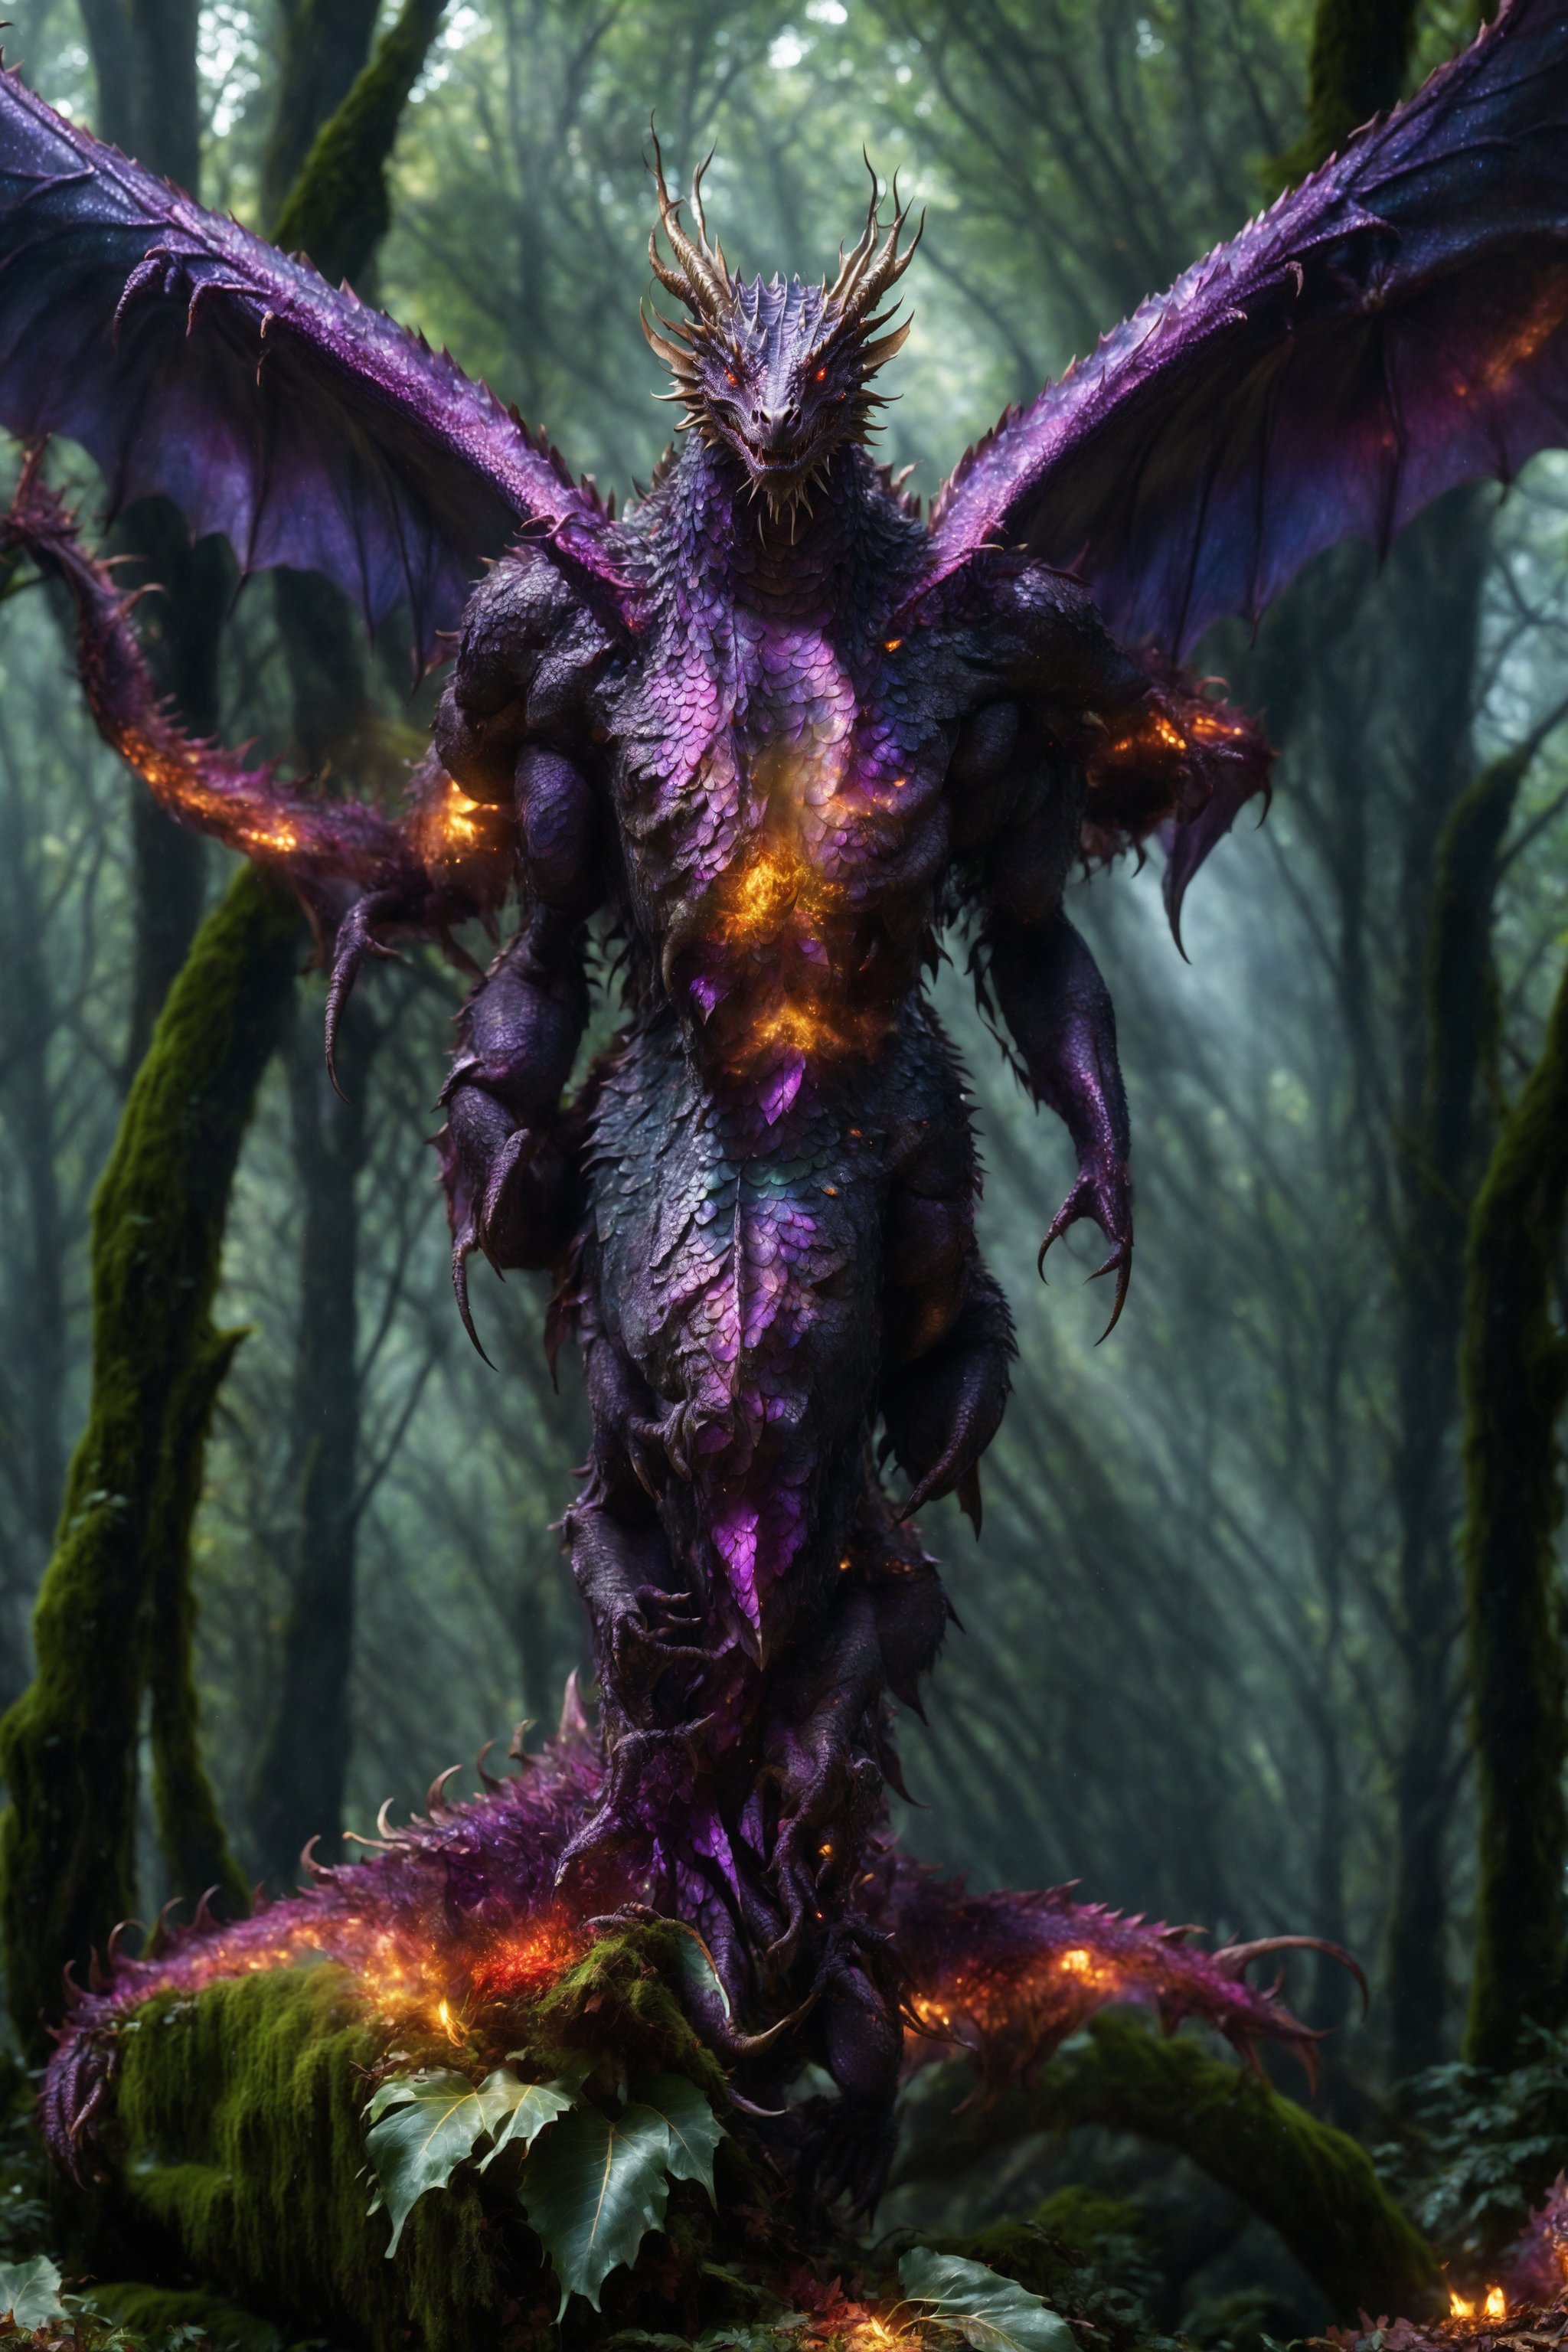 A cinematic shot of an enormous man shaped giant walks on 2 legs emerging from the dark verdant autumn green and brown leaf forrest behind it,  it approaches the viewer. As it walks it reveals glittering red purple and black opal scales that refract light like dew drops on its super-hyper-real detailed textured skin. the giants branchlike wings behind its back blend seamlessly with the surrounding foliage. Purple green smoke rises from the ground below its feet. The camera captures the scene in stunning HDR, showcasing the golden highlights on the dragon's scales as it moves through a misty forrest floor dotted with dew-kissed rocks huge leafy vegetation and moss-covered tree trunks all in hyper real detail.,DRG